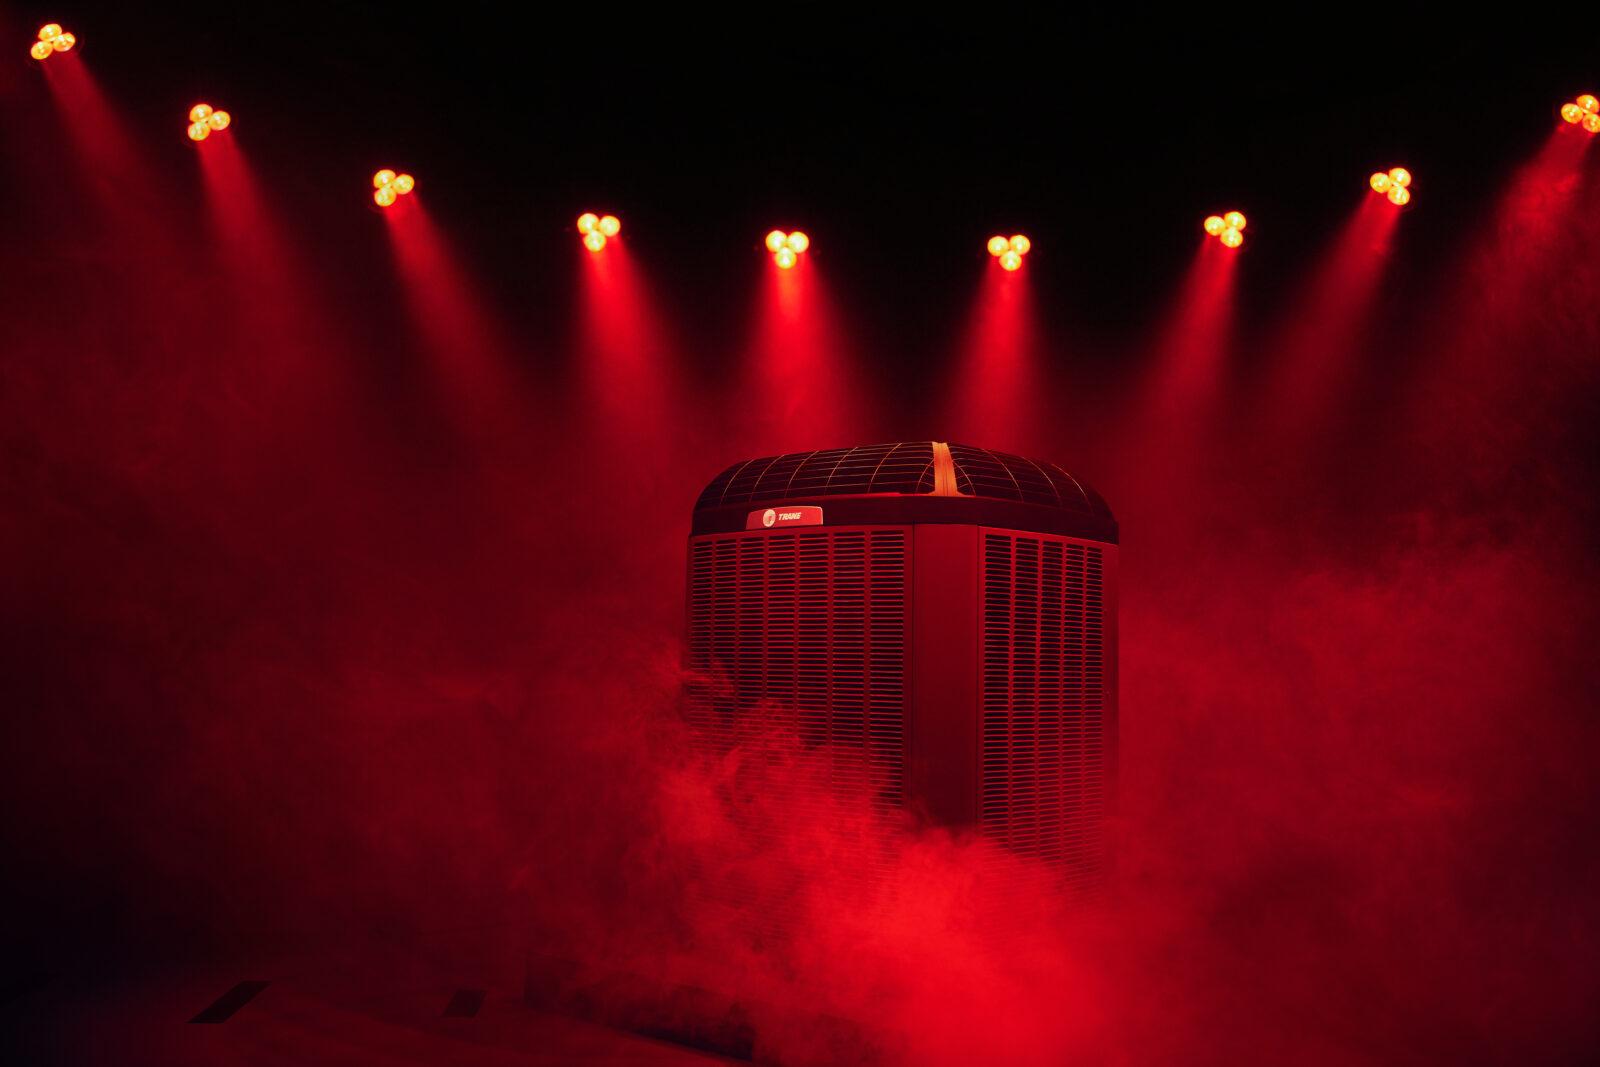 A home HVAC air unit is sitting in a cloud of red steam.